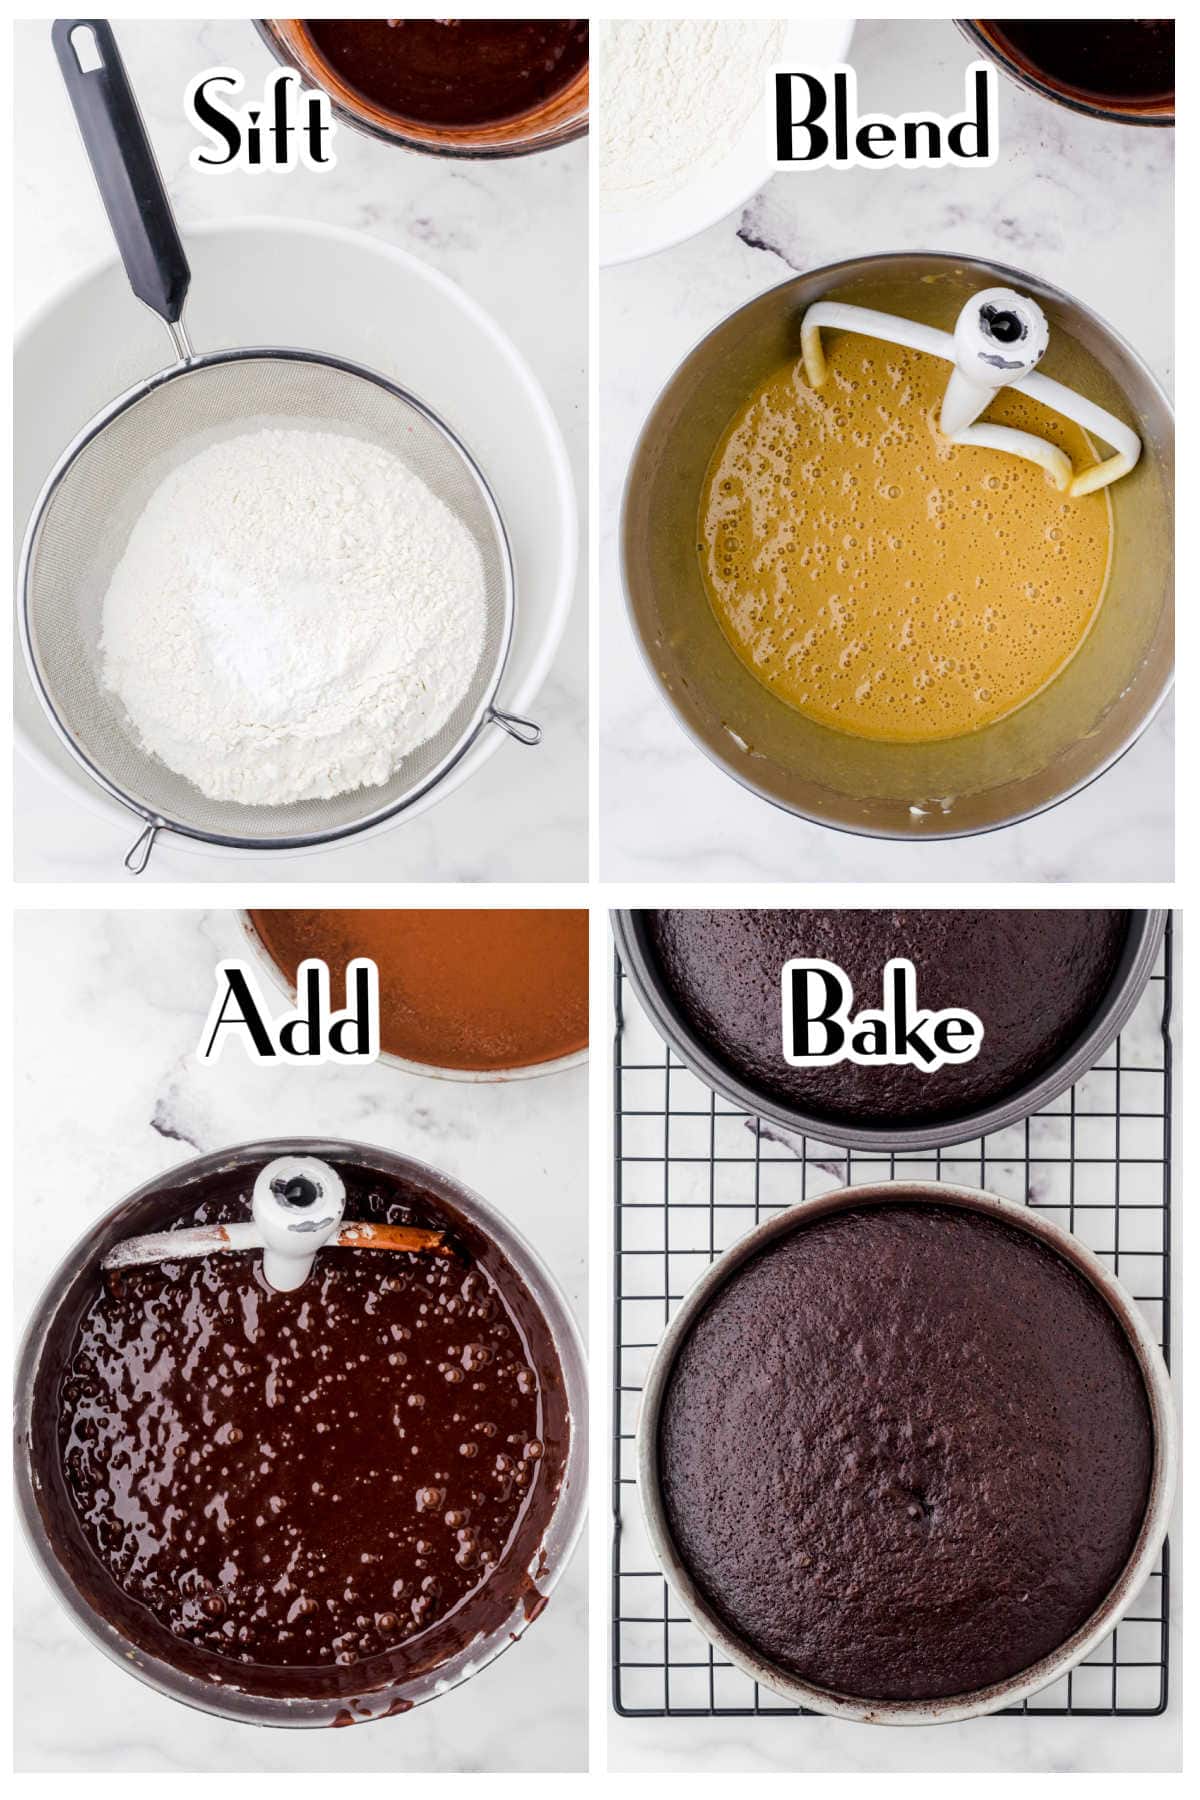 Step by step images for making this cake.